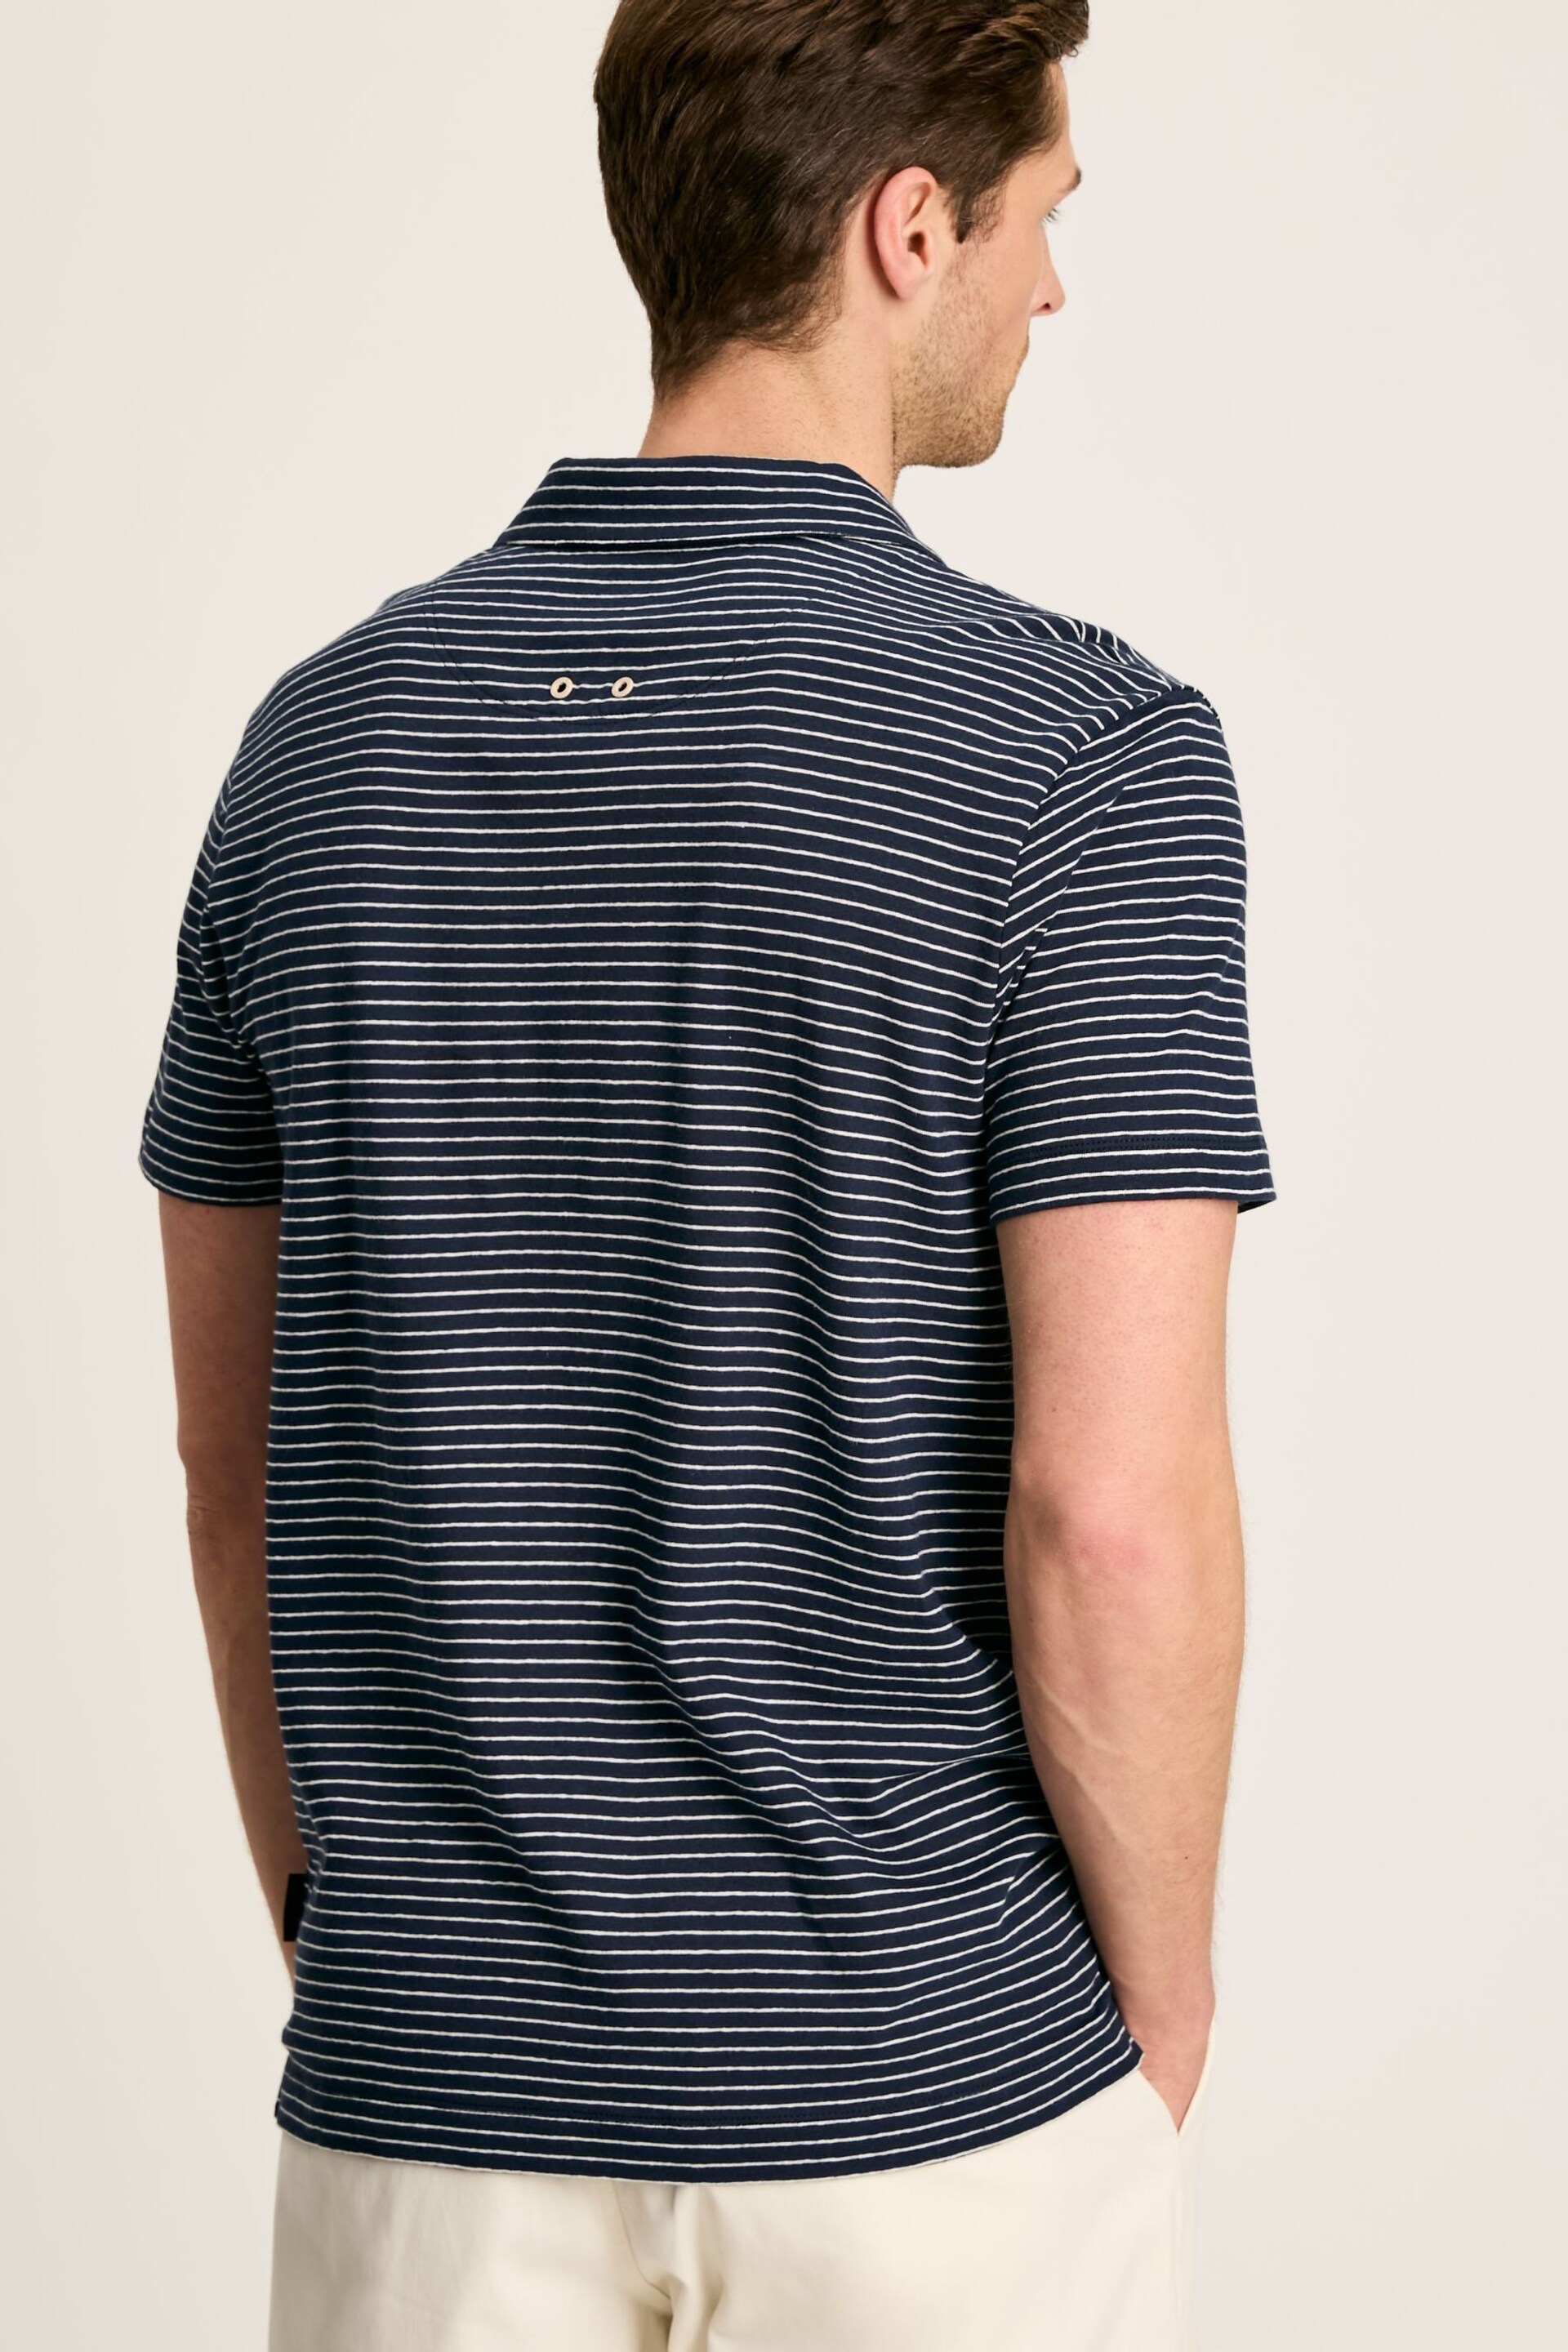 Joules Linen Blend Navy Blue Striped Polo Shirt - Image 4 of 9